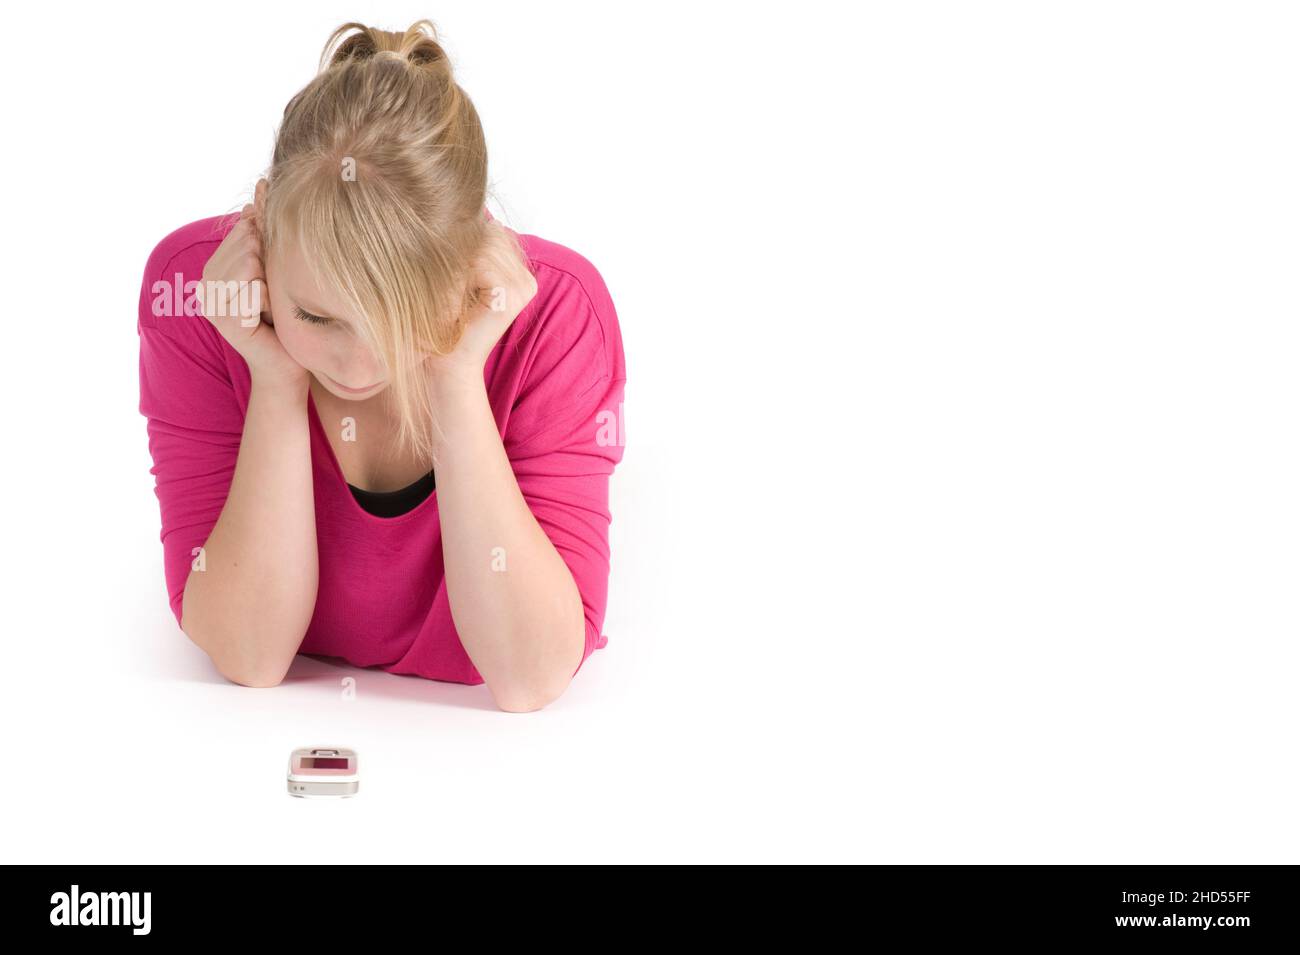 Teenage girl lying down and waiting for a call. Studio shot on white background. Stock Photo